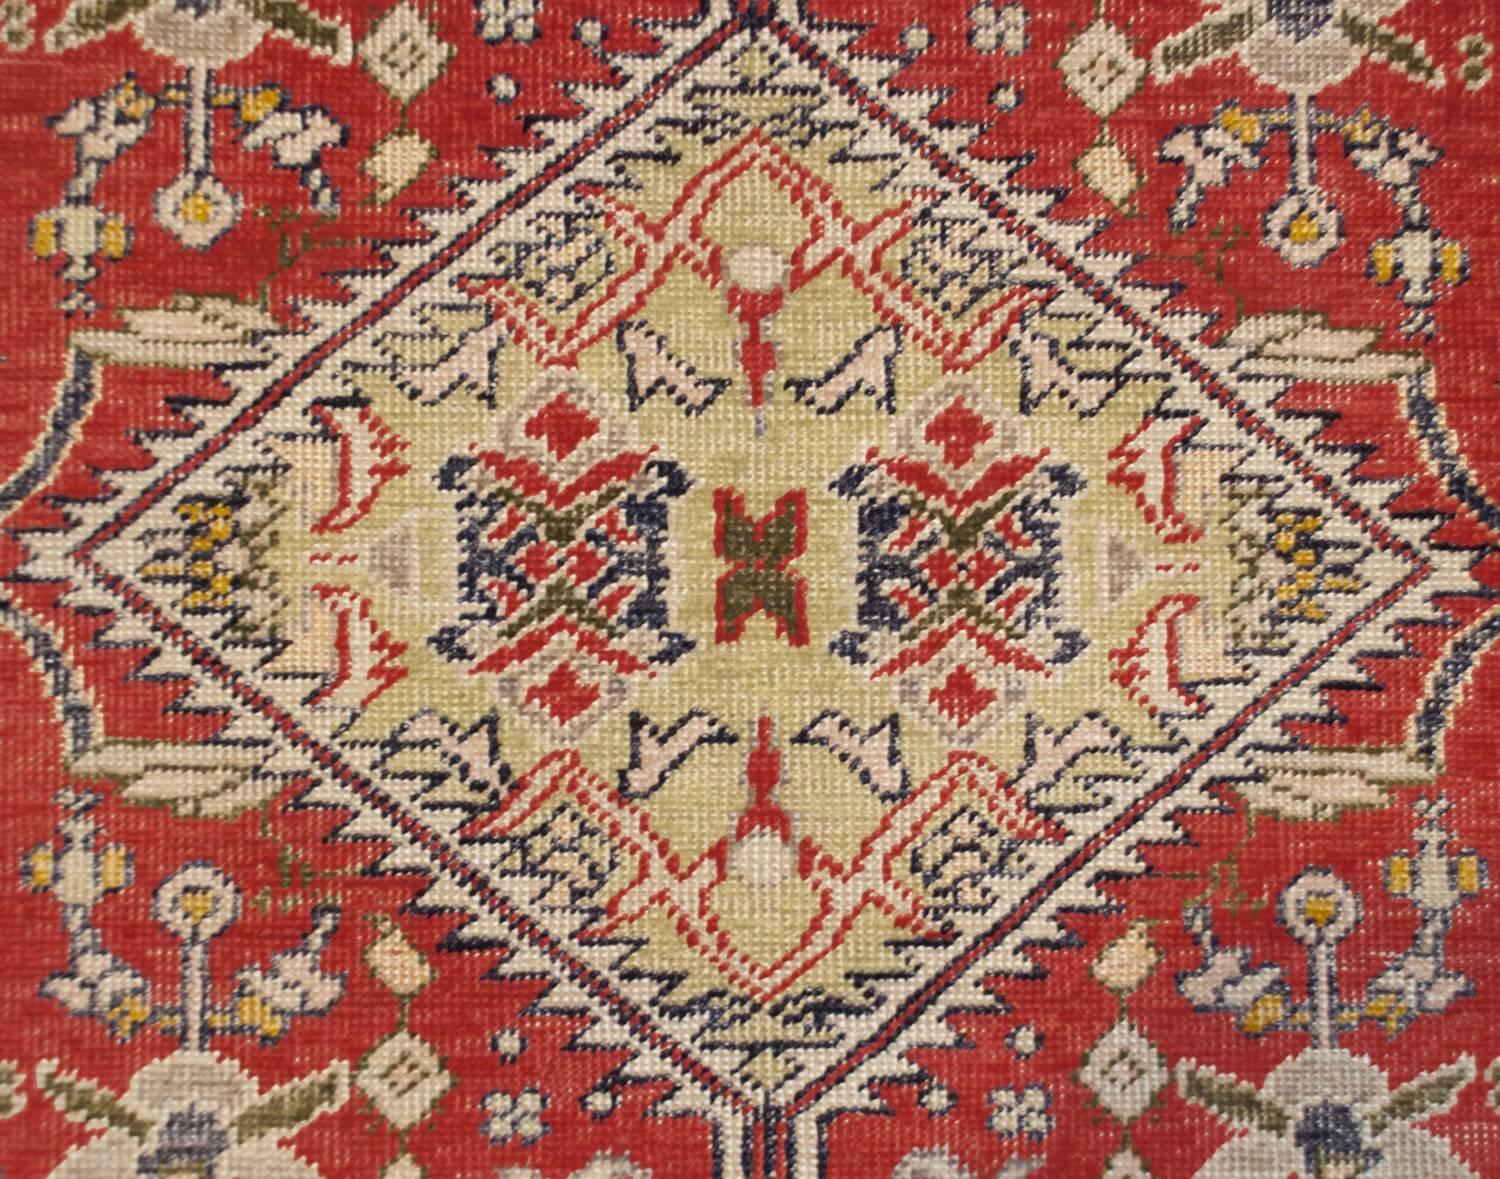 A wonderful early 20th century Turkish silk Kayseri rug with an incredible pattern referred to as 